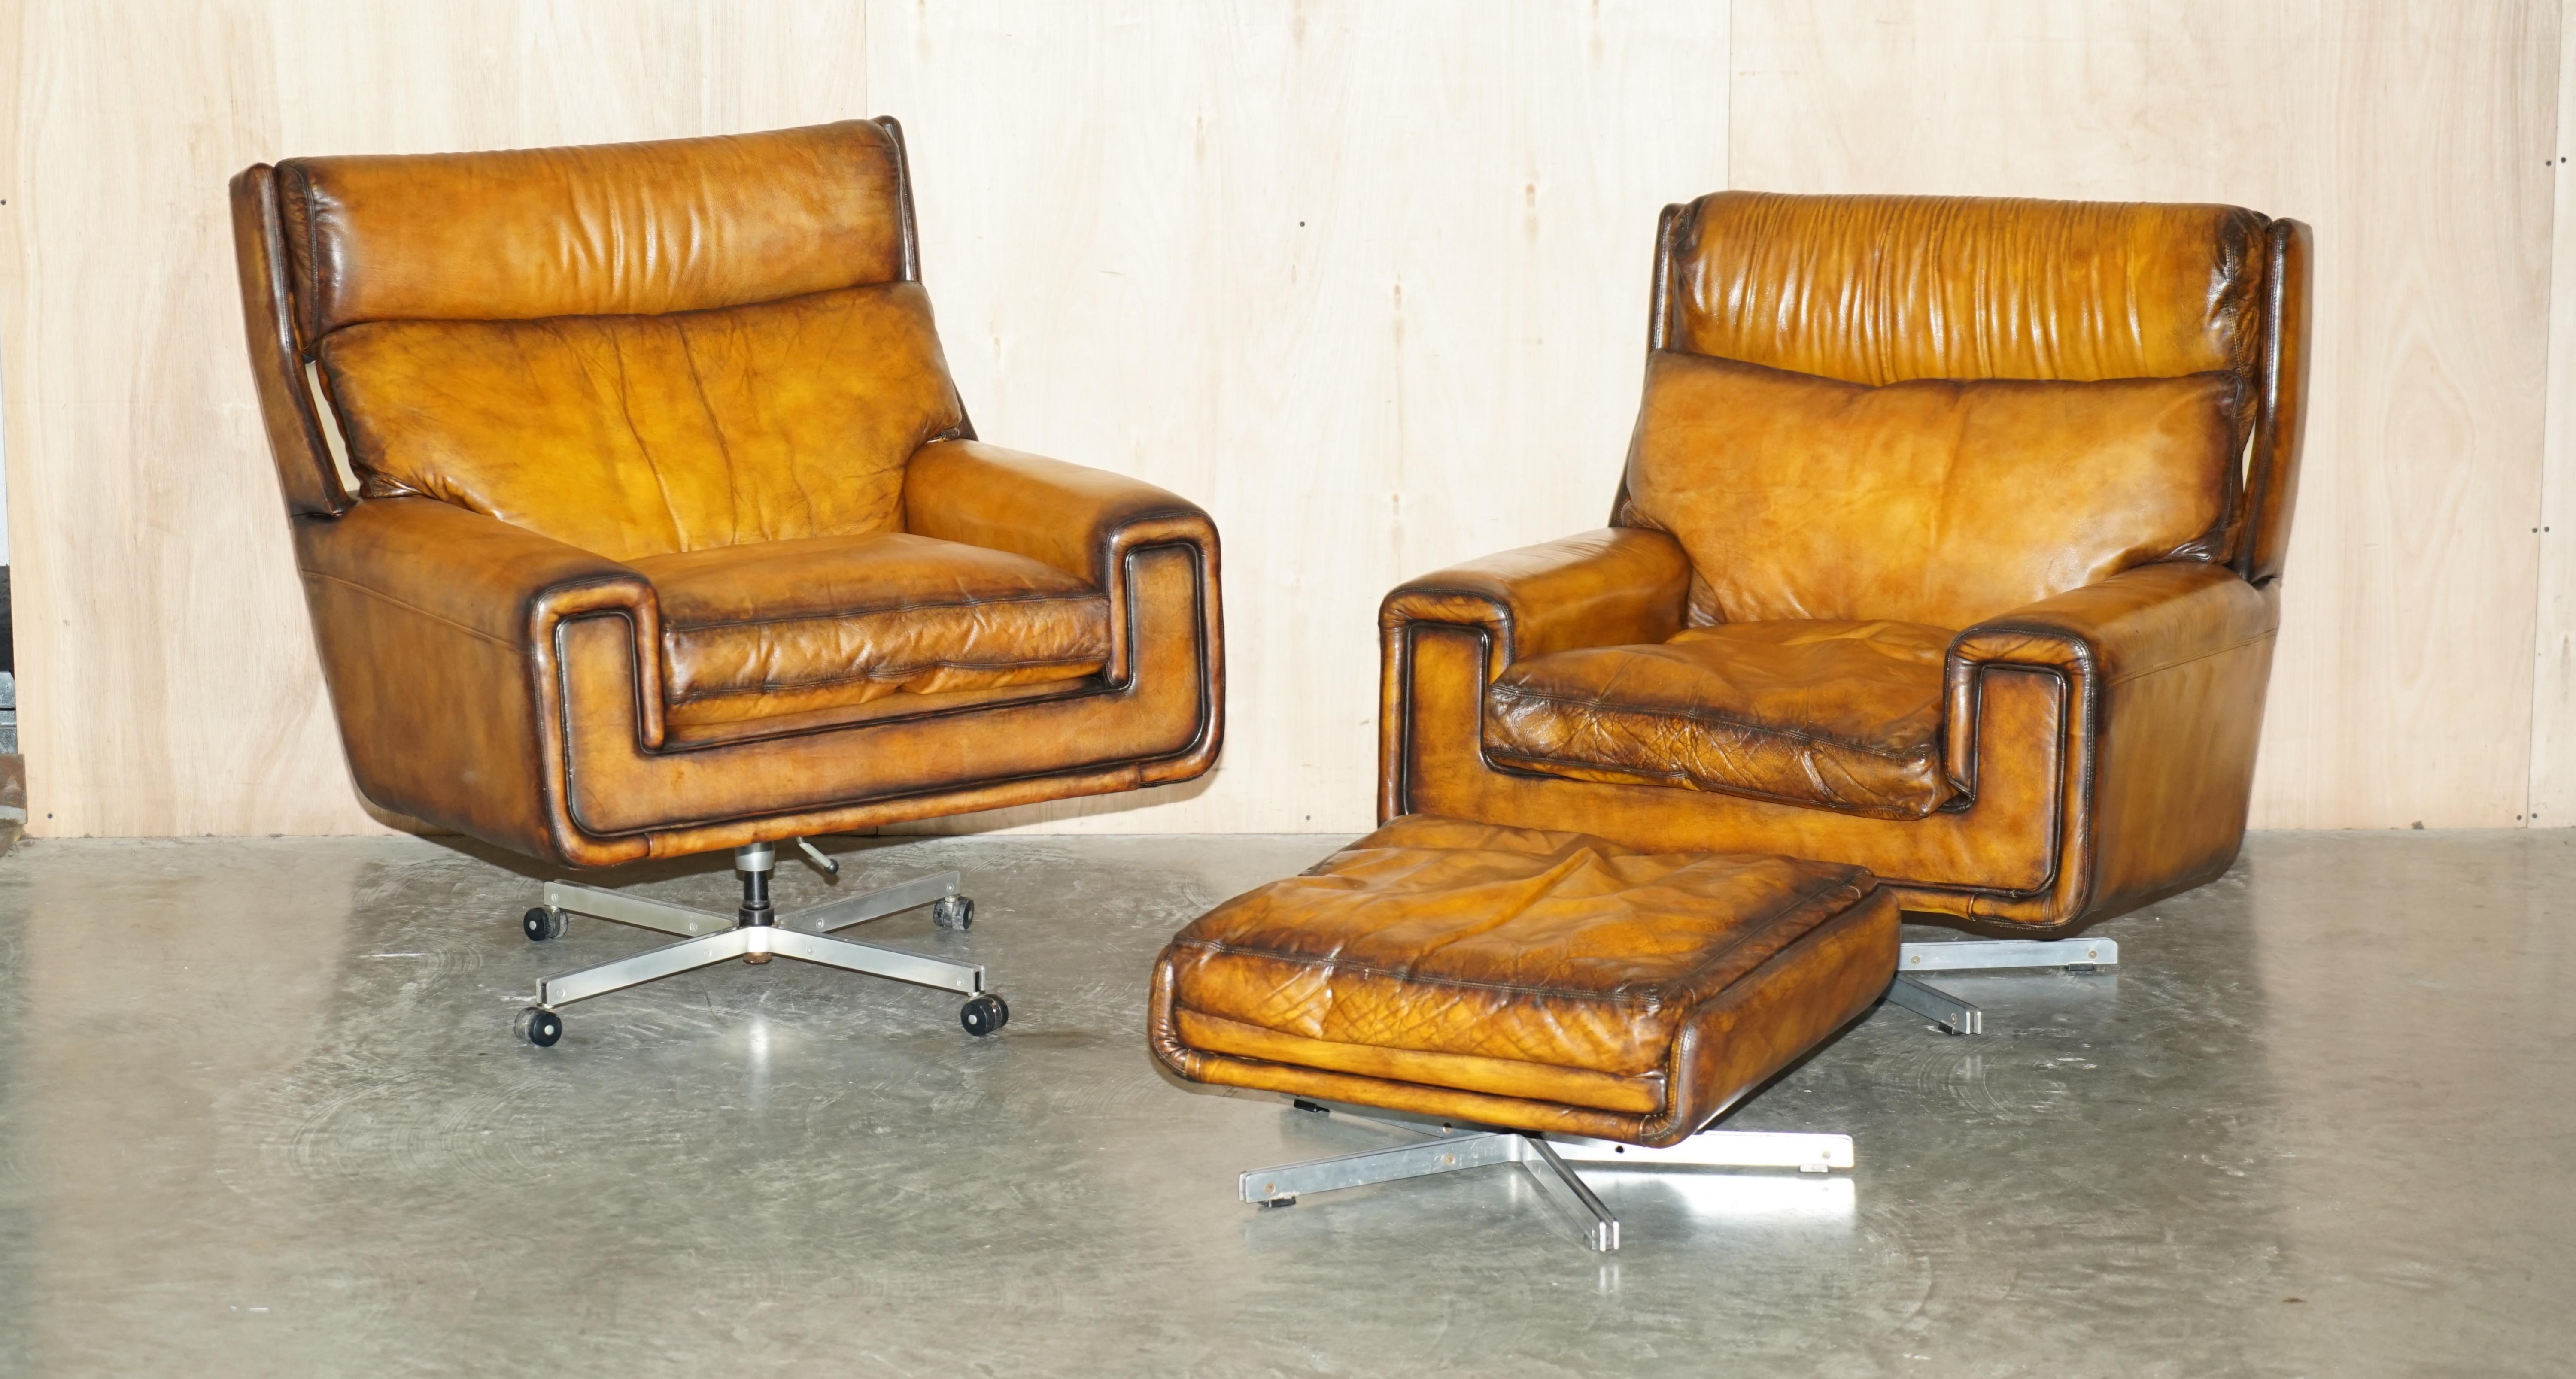 We are delighted to offer for sale this stunning fully restore vintage circa 1970's hand dyed Whisky brown leather swivel armchair with matching ottoman which is part of a small suite 

Please note the delivery fee listed is just a guide, it